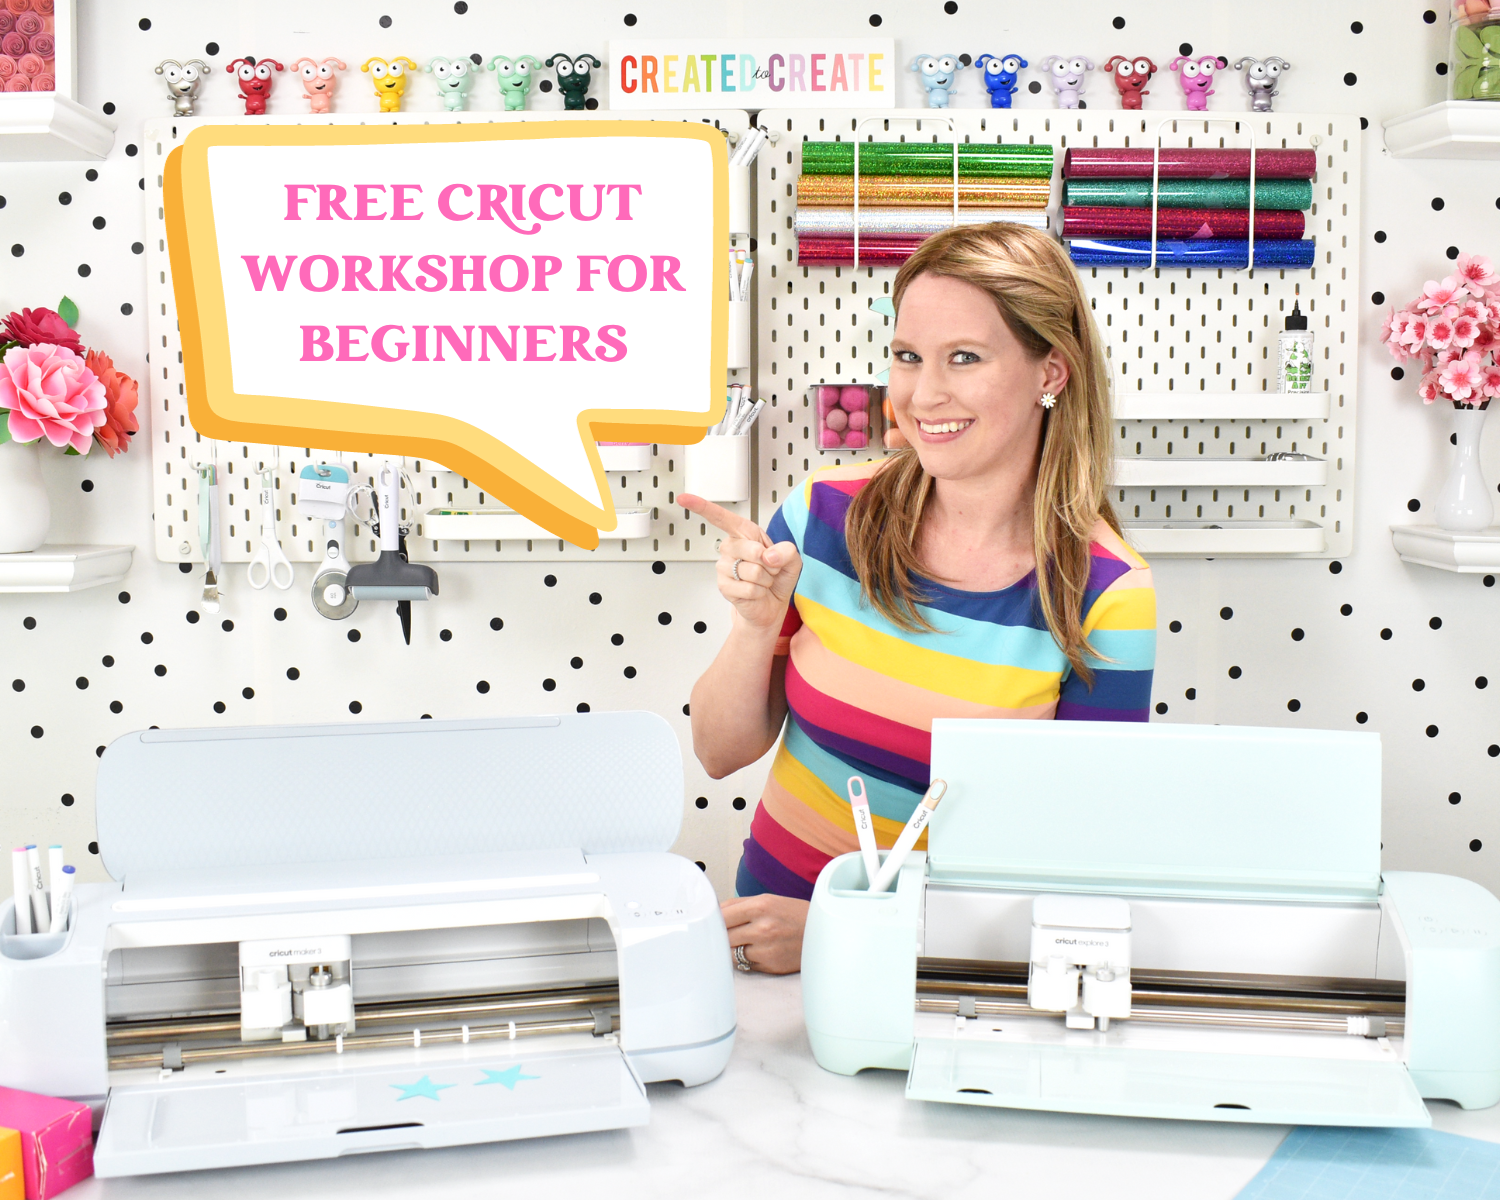 Cricut Blades & Tools - An Ultimate Guide for Beginners - Cricut Coaching  and Crafting